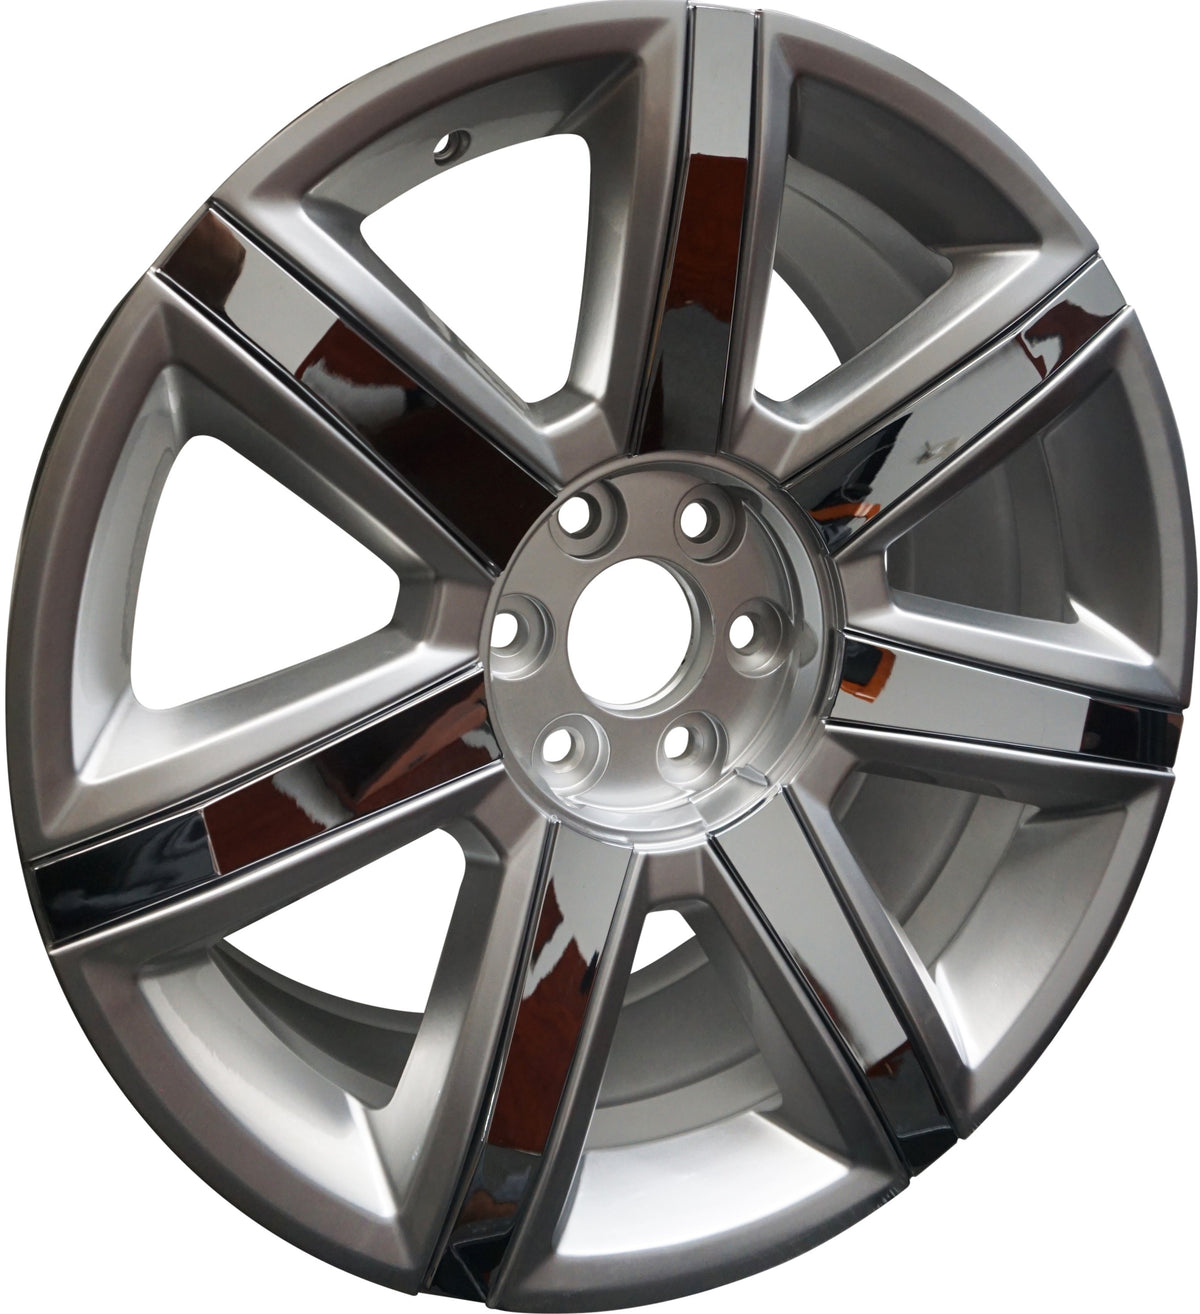 22" CADILLAC SILVER WITH CHROME INSERTS RIMS FITS ESCALADE EXT ESV BRAND NEW